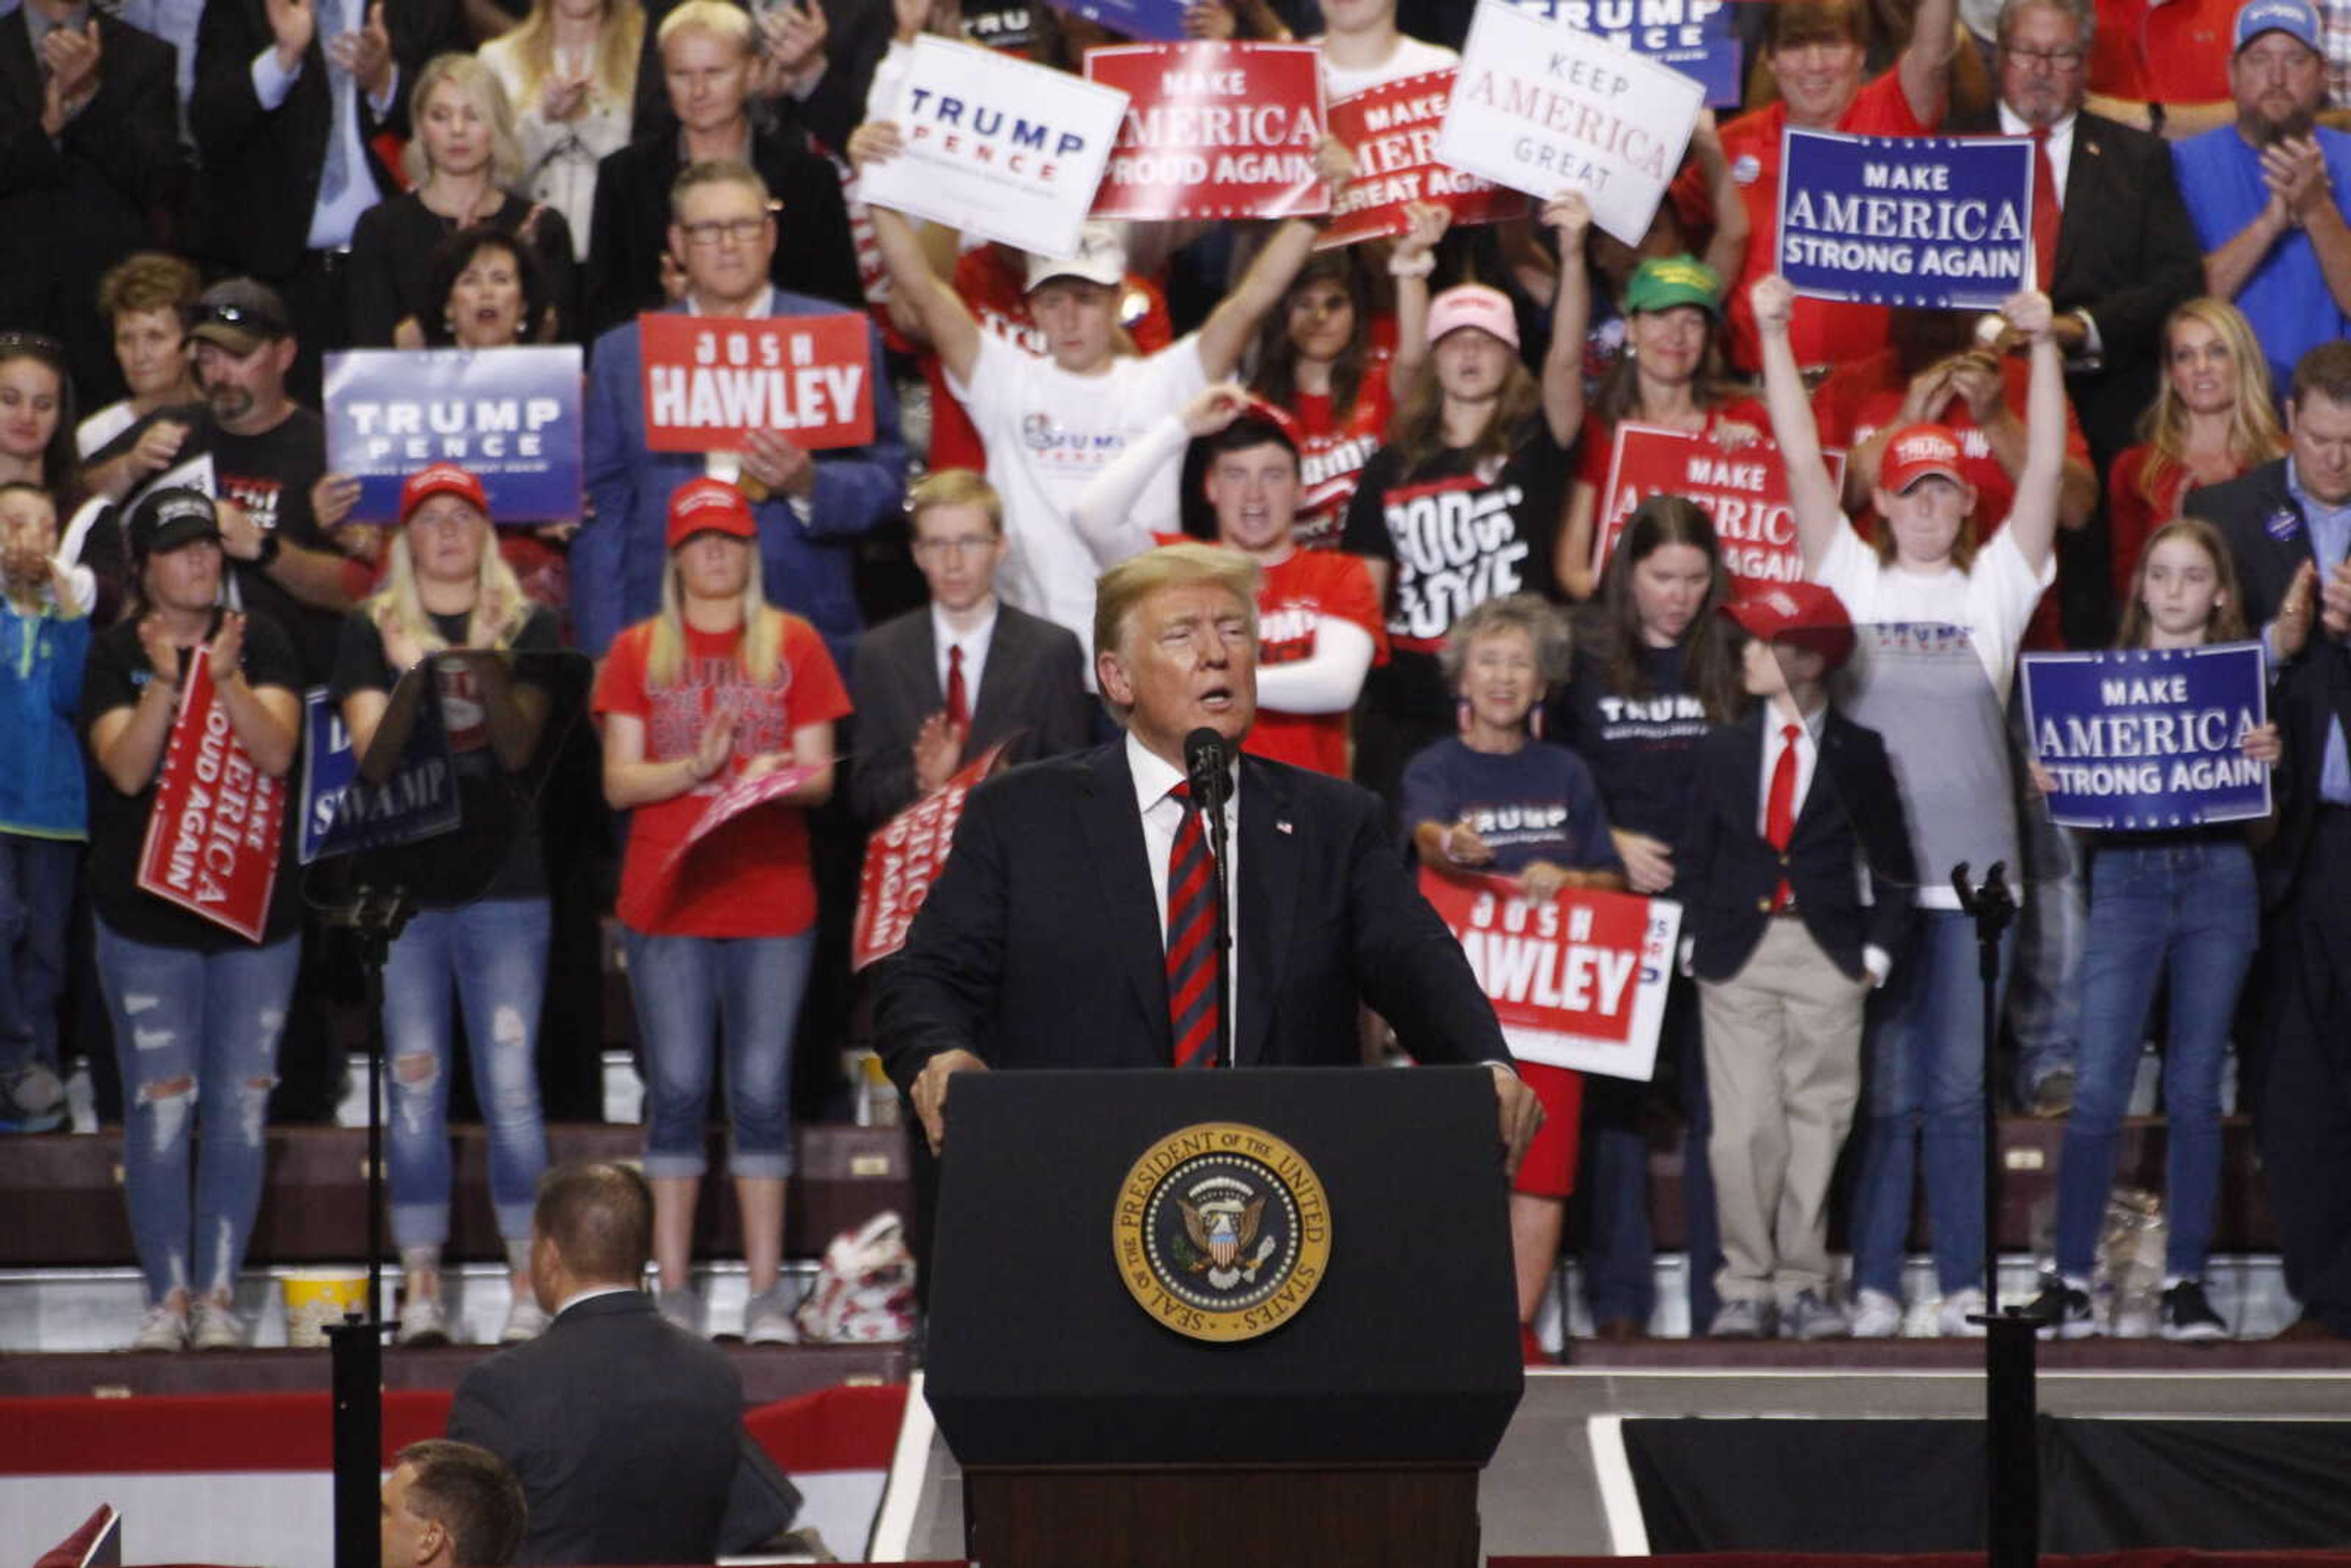 President Donald Trump speaks at the JQH Arena in Springfield, Mo. Sept. 21.